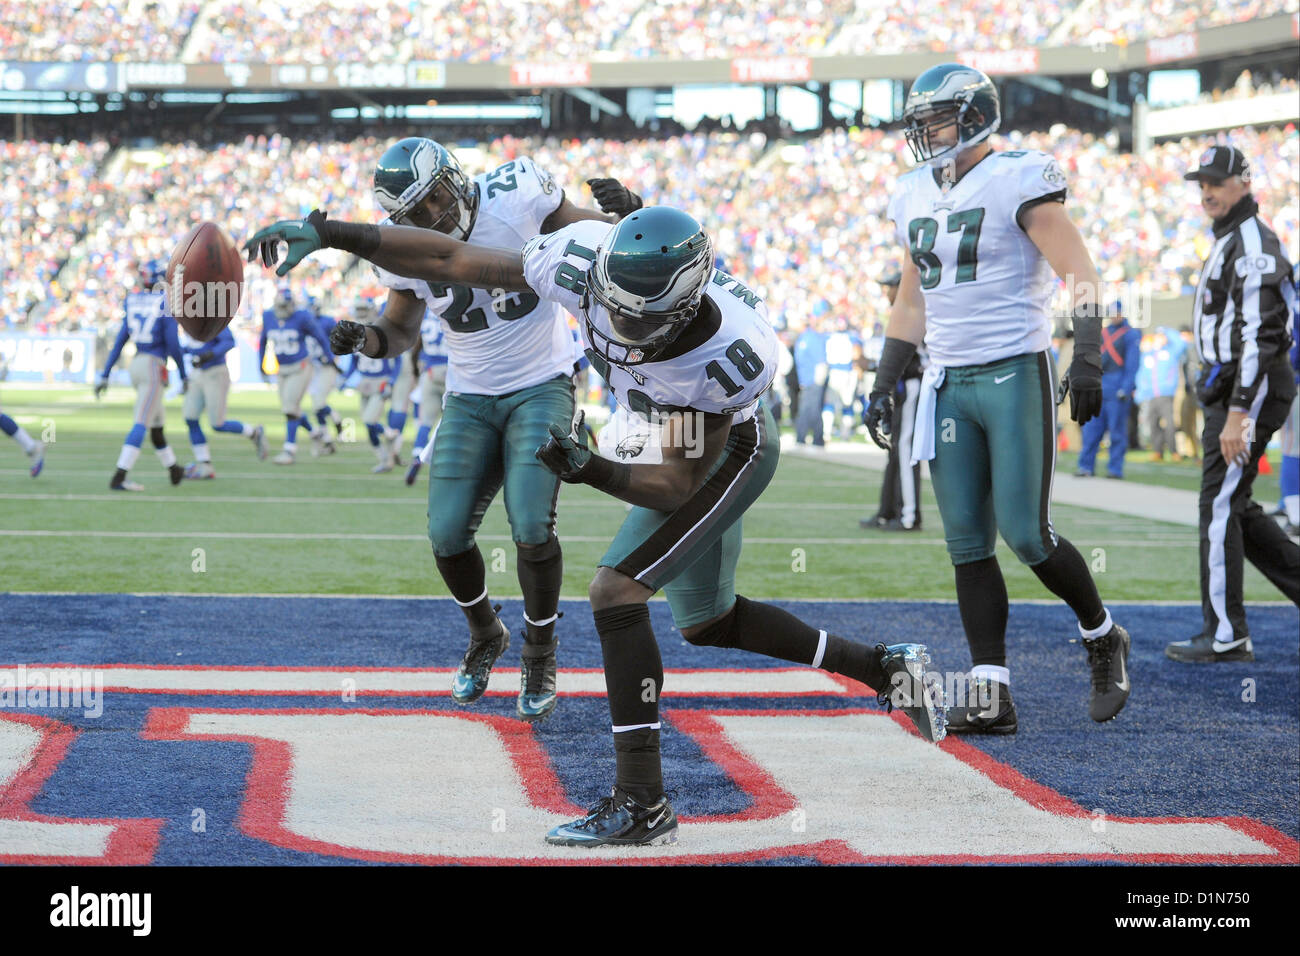 New Jersey, USA. 30 December 2012: Philadelphia Eagles wide receiver Jeremy Maclin (18) after scoring a touchdown during a week 17 NFL matchup between the Philadelphia Eagles and New York Giants at MetLife Stadium in East Rutherford, New Jersey. Stock Photo